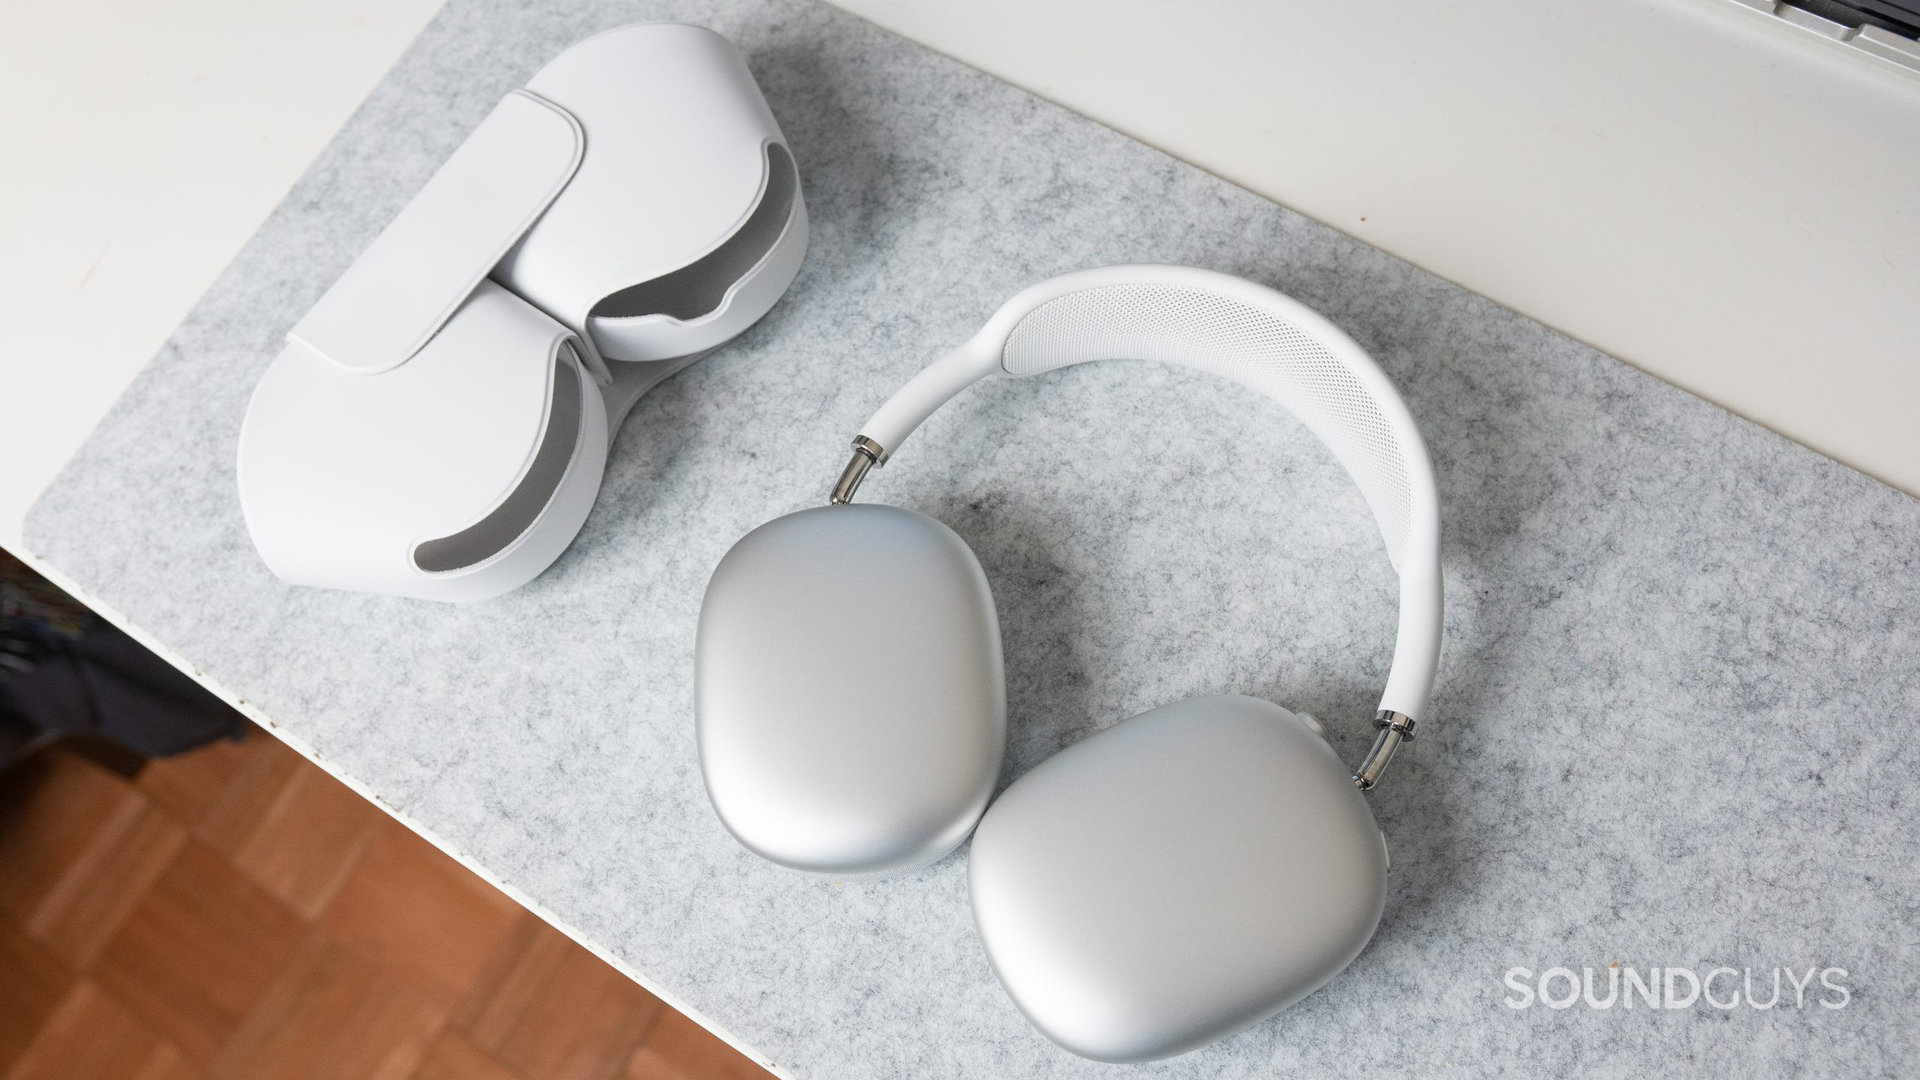 The Apple AirPods Max and their smart case on a white desk.